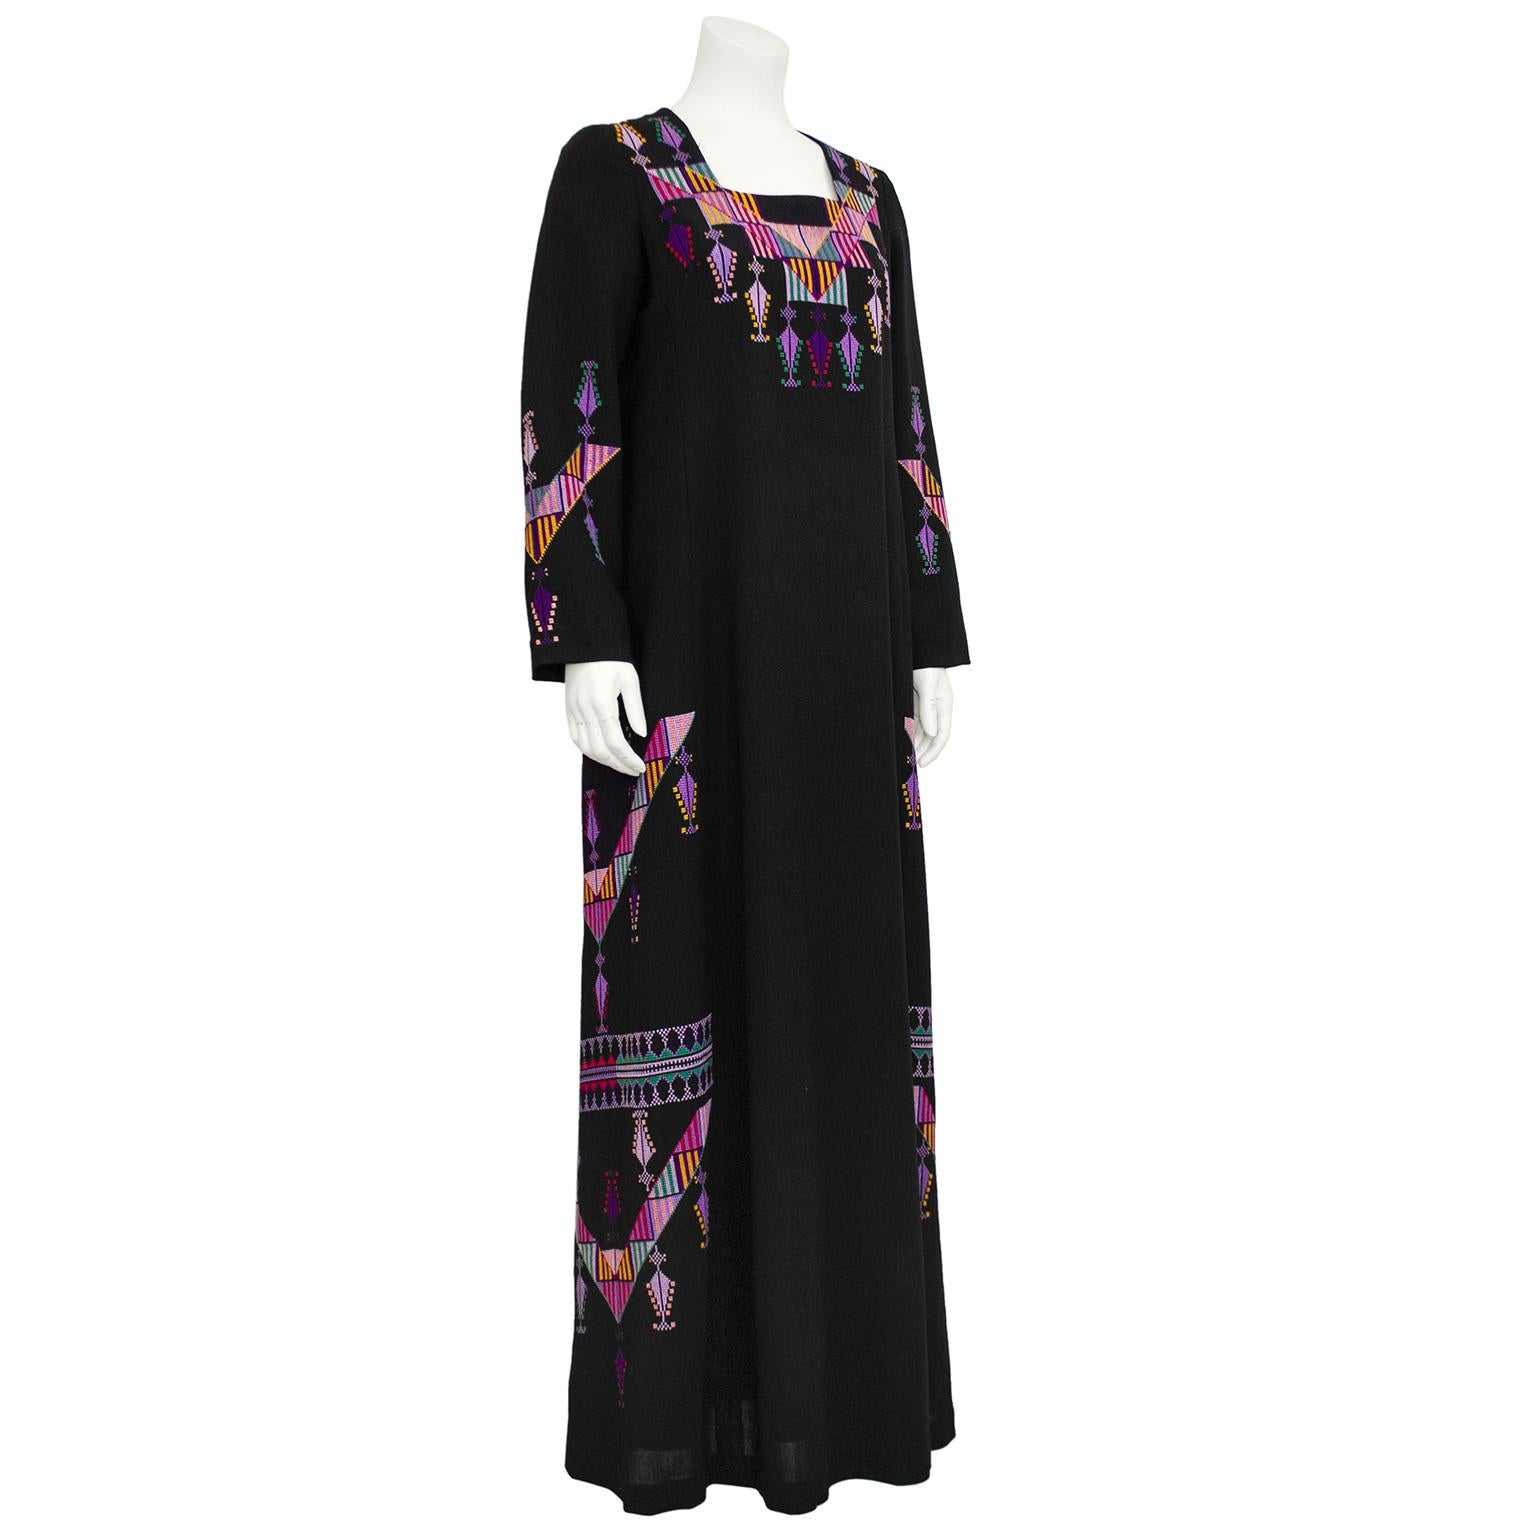 Really stunning made in Israel  kaftan from the 1970s by well known design house Maskit. Fine black wool with long sleeves and a square neckline. The kaftan is embellished with beautifully eye catching multi colour cross stitch embroidery at the